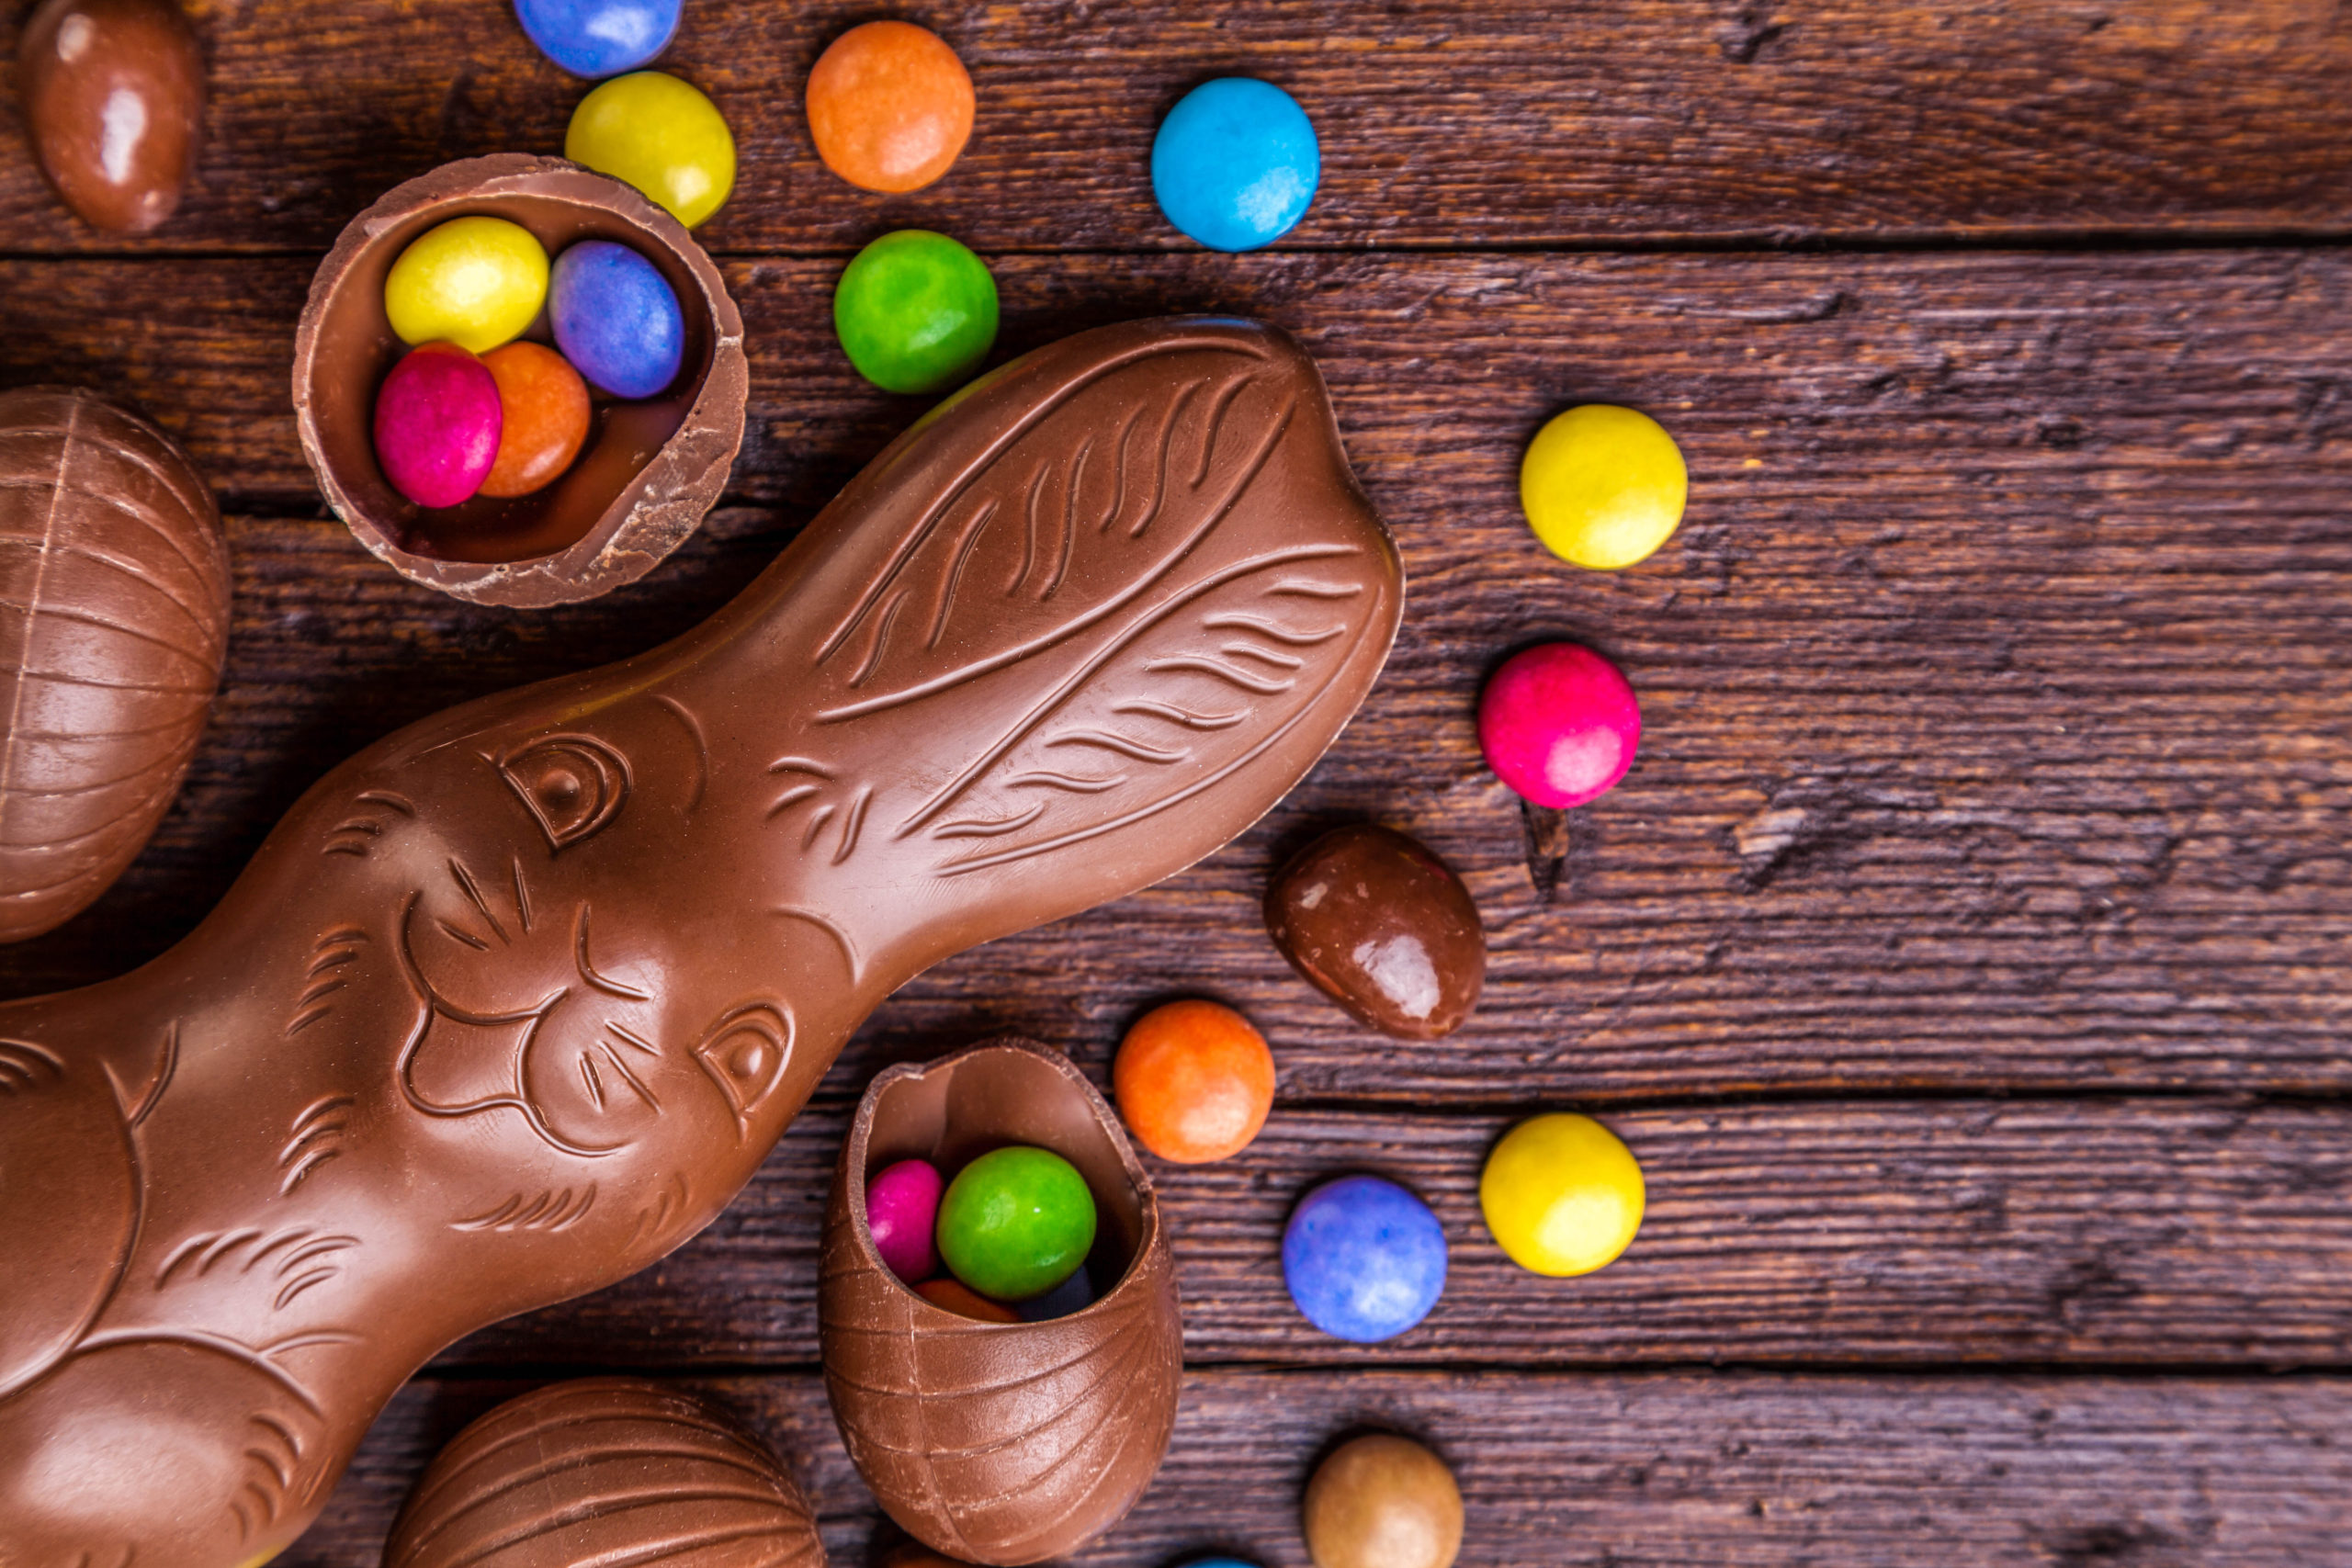 Sweet treats make Easter special - From chocolates to marshmallows to caramel eggs to jelly beans, Easter is chockful of candy. And for those who think Easter is only child's play, guess again.